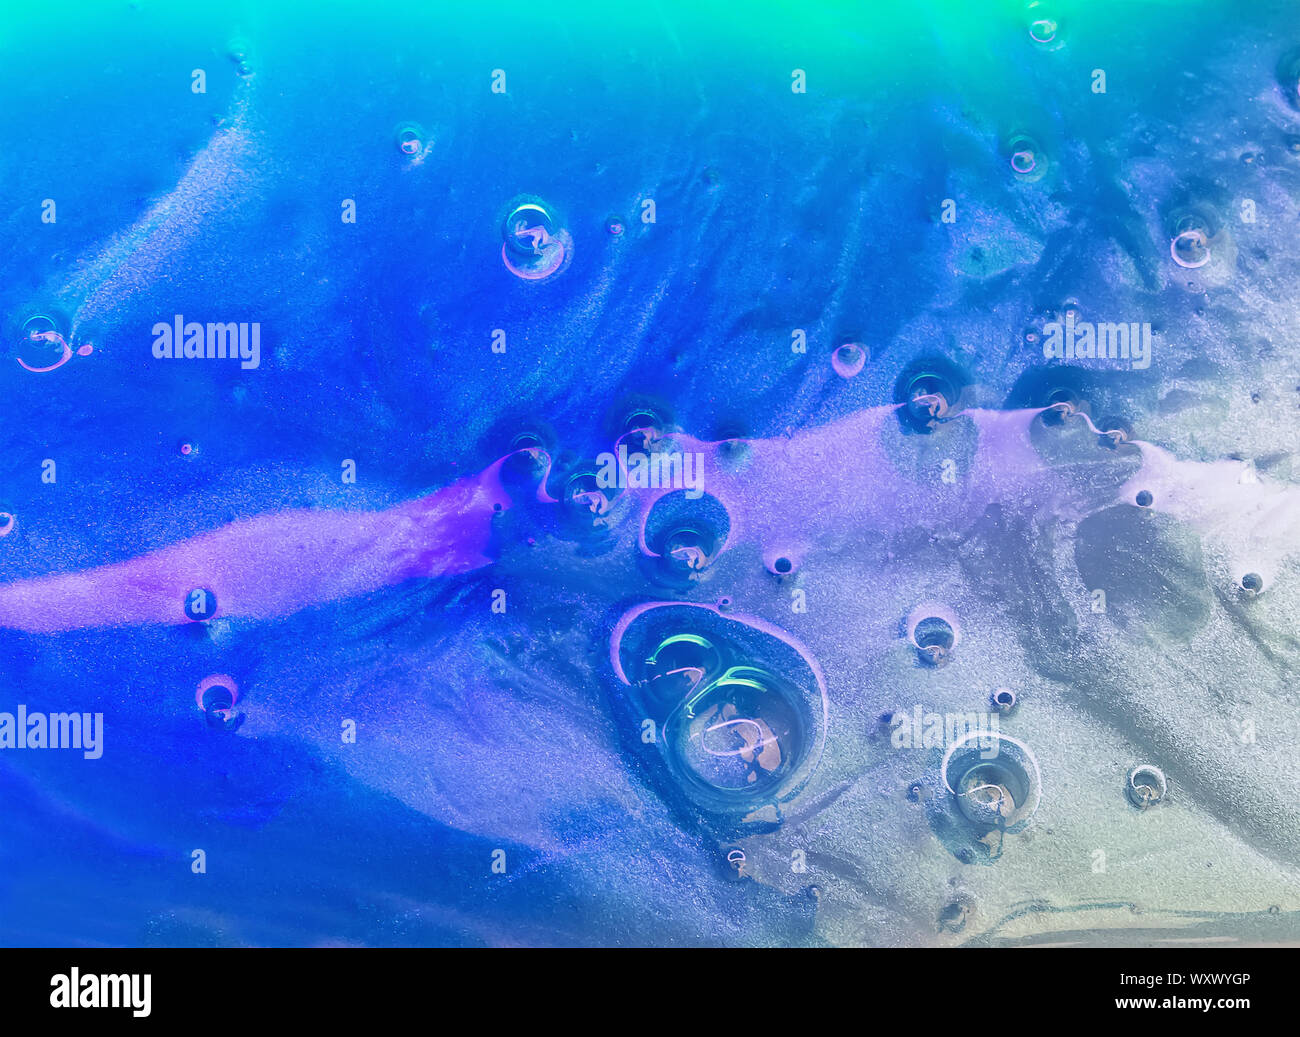 Texture of slime or other liquid substance lighted with purple and ...